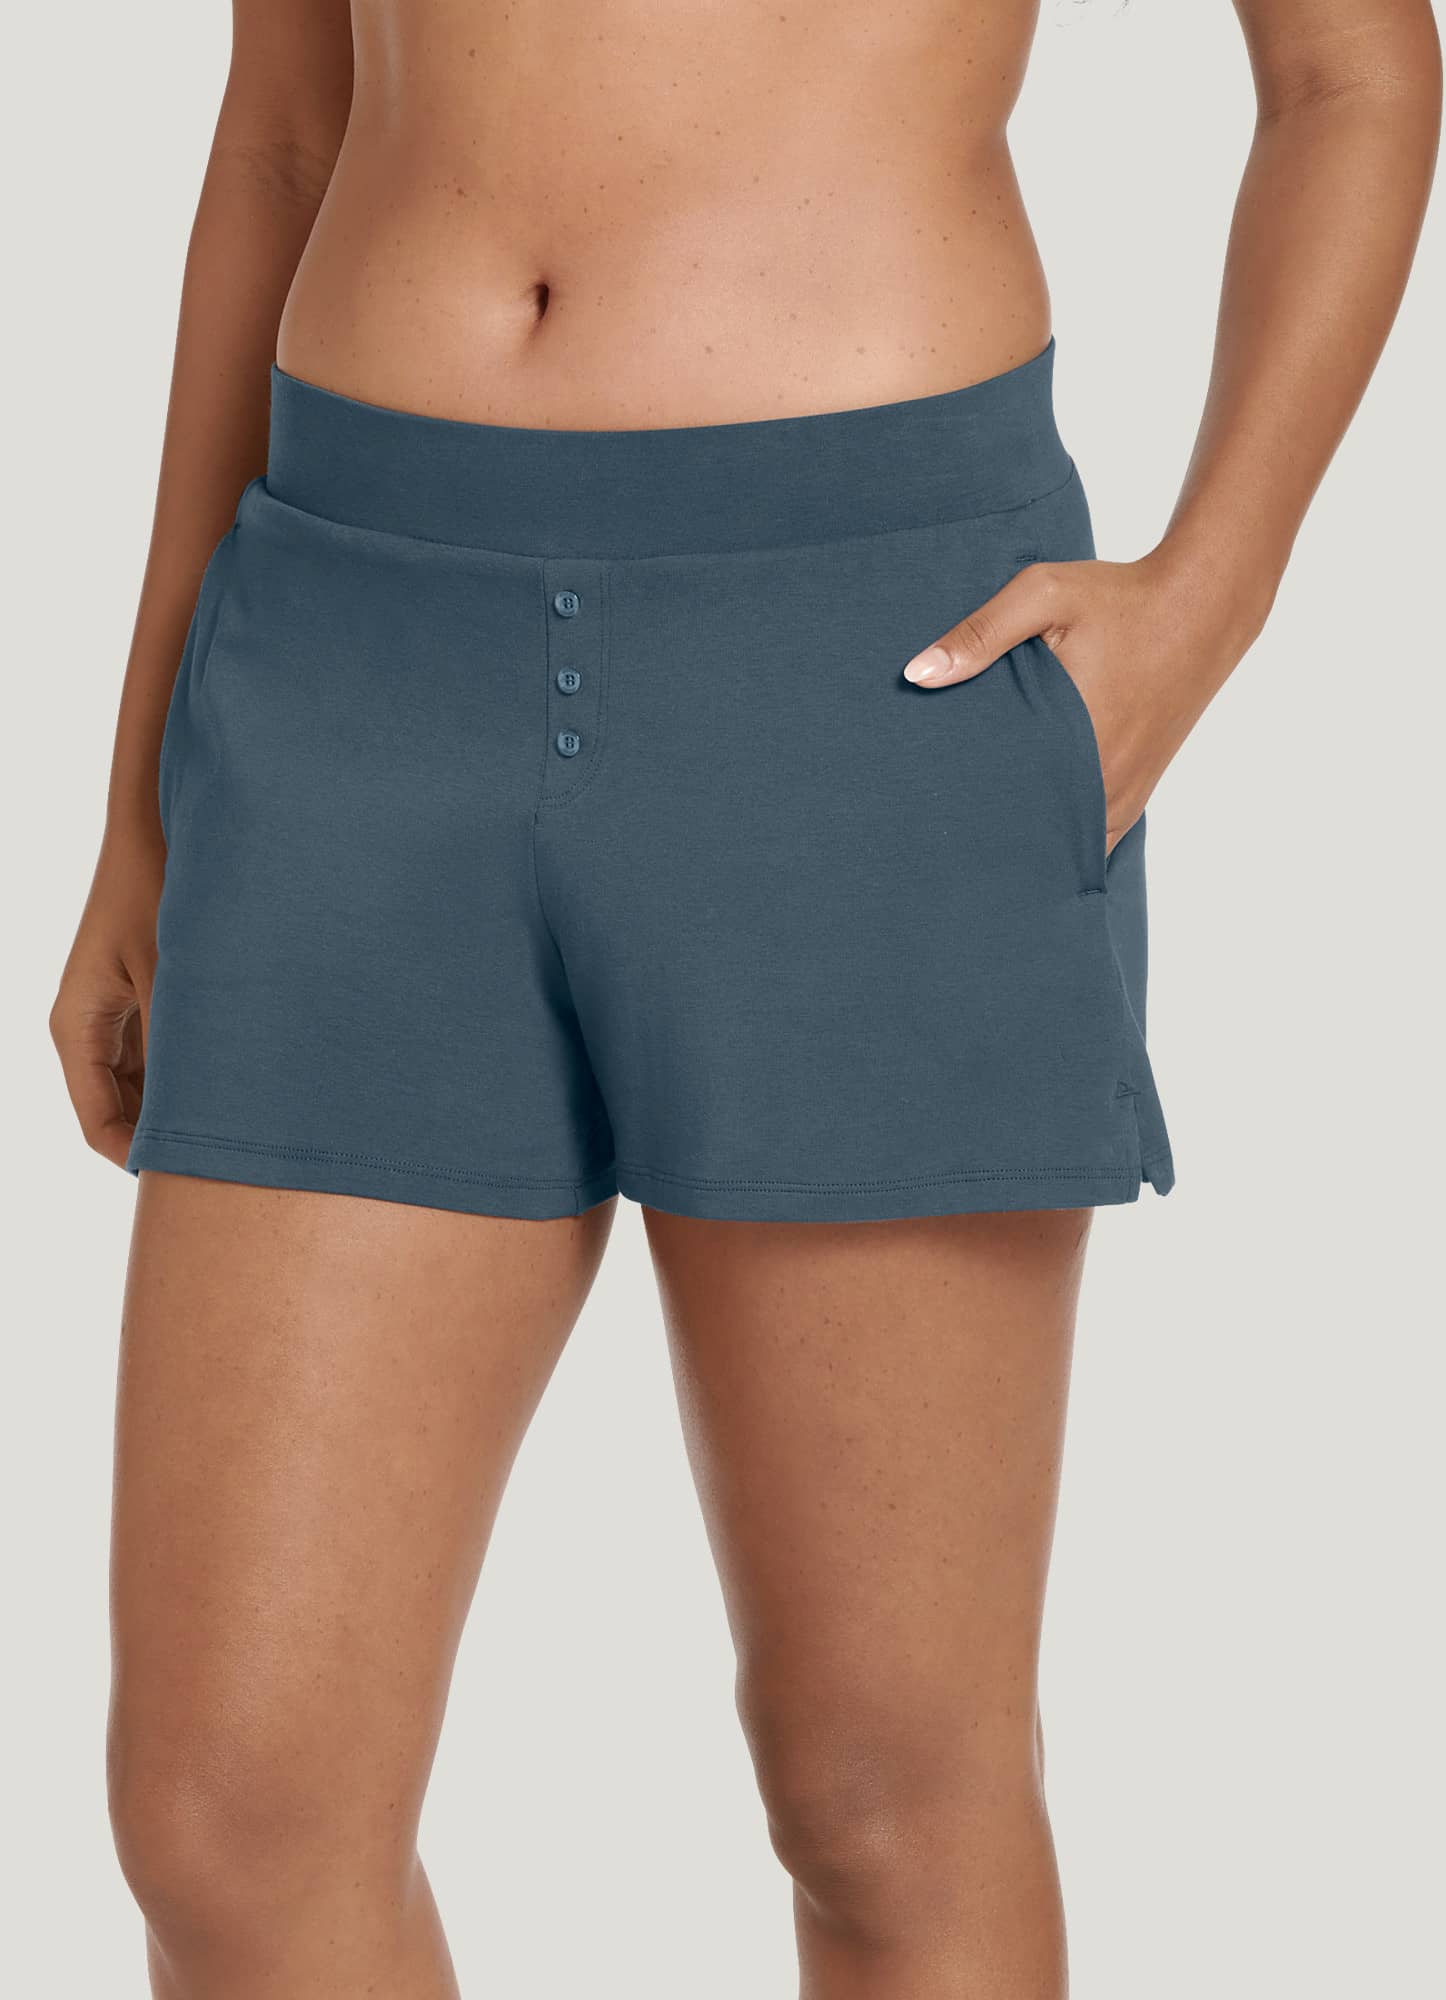 Period. by The Period Company. The High Waisted Period. in Sporty Stretch  for Heavy Flows. Size Large 